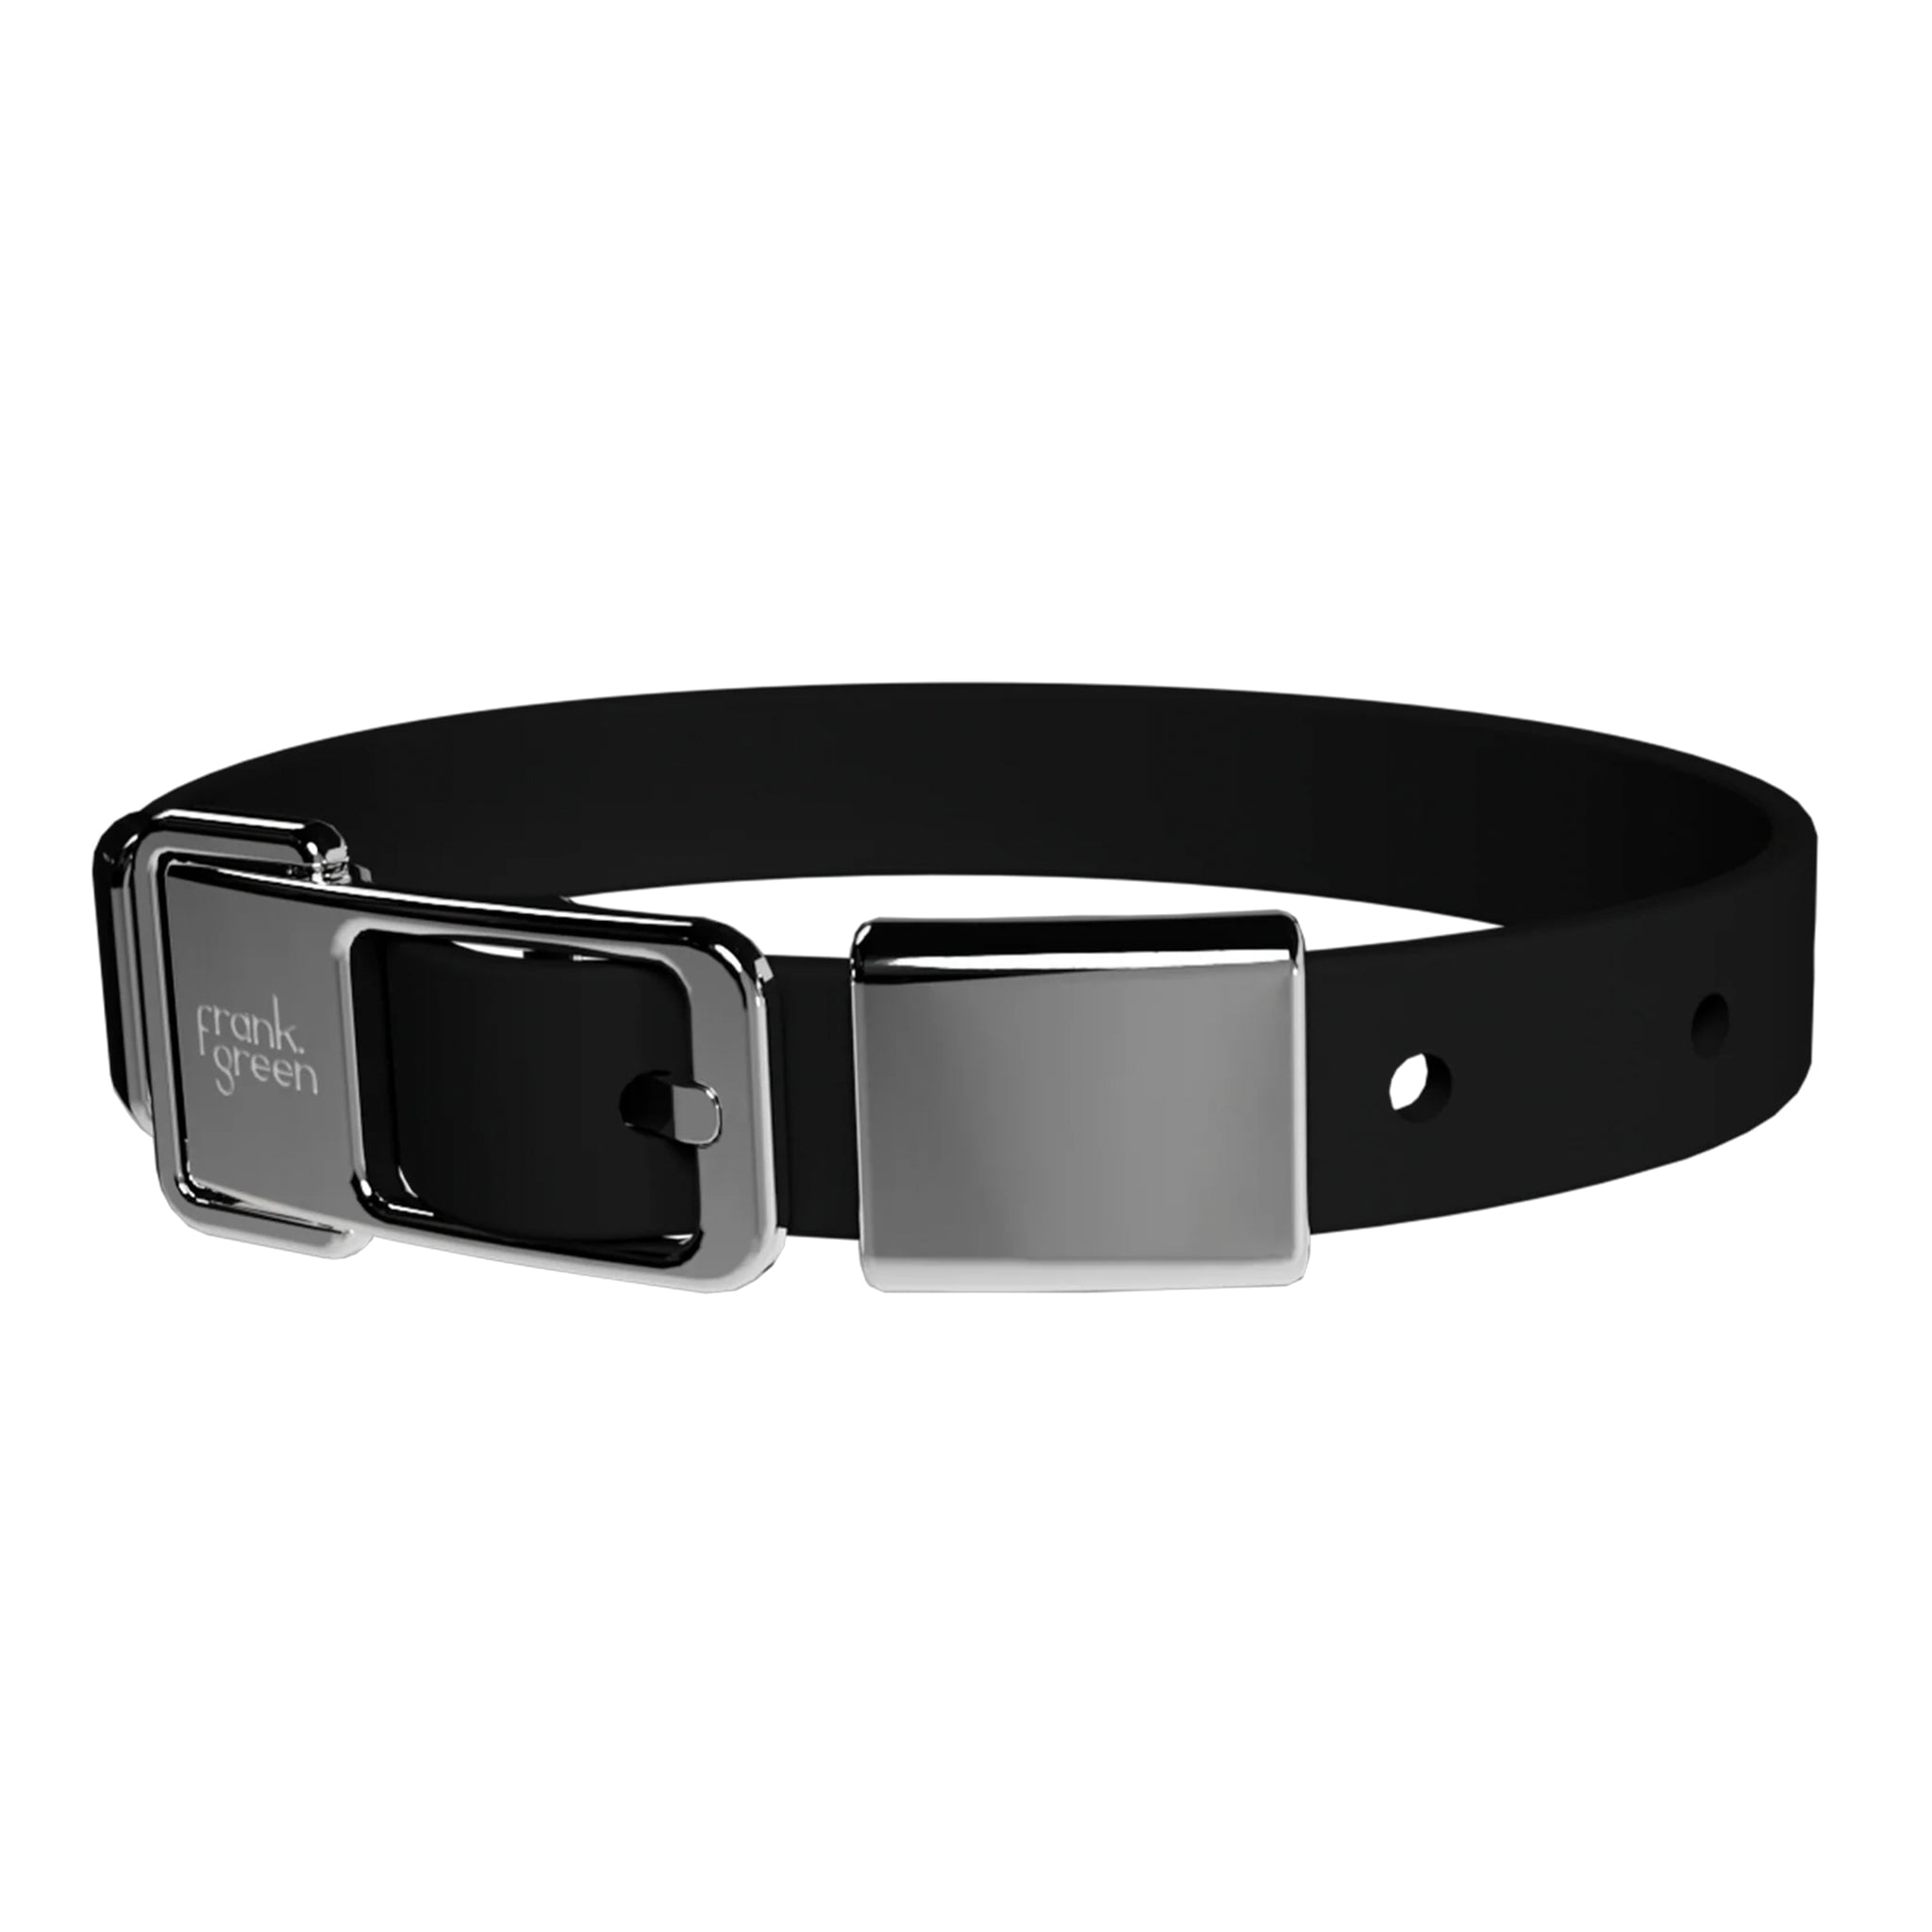 Frank Green Pet Collar with Name Tag - Midnight - Tea Pea Home